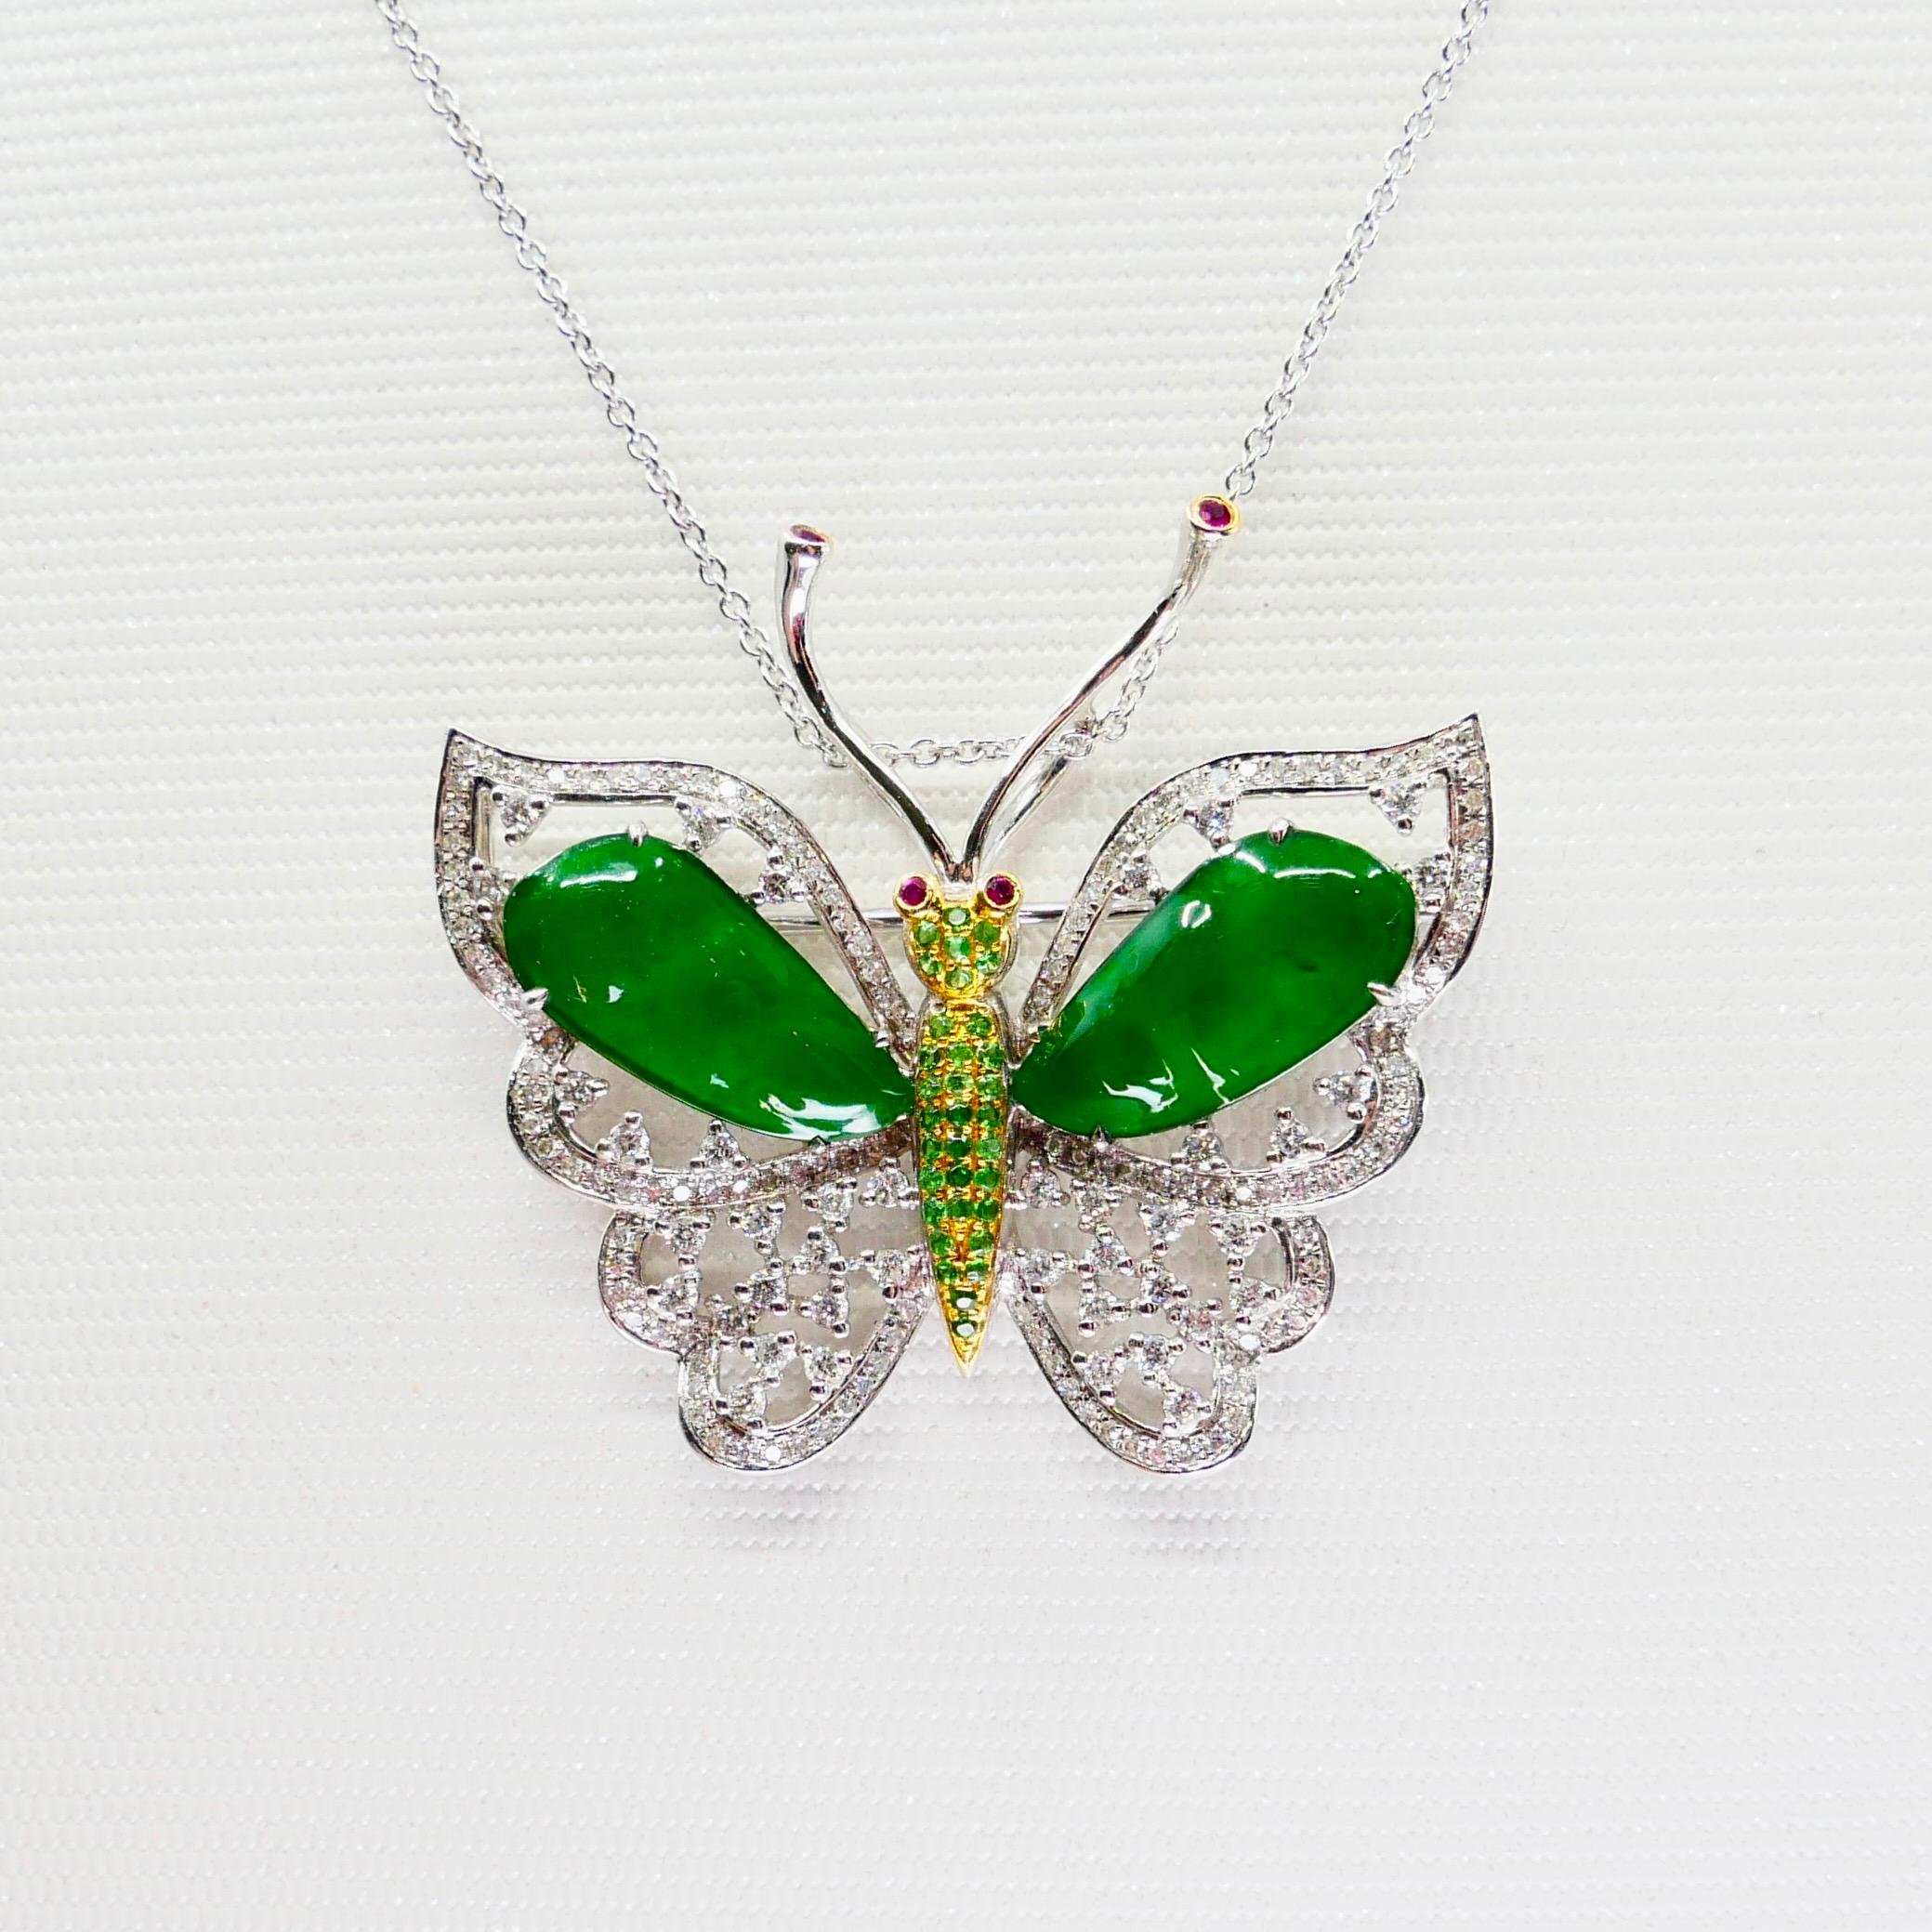 Women's Certified Imperial Jade, Diamond Butterfly Pendant / Brooch, Collector Quality For Sale